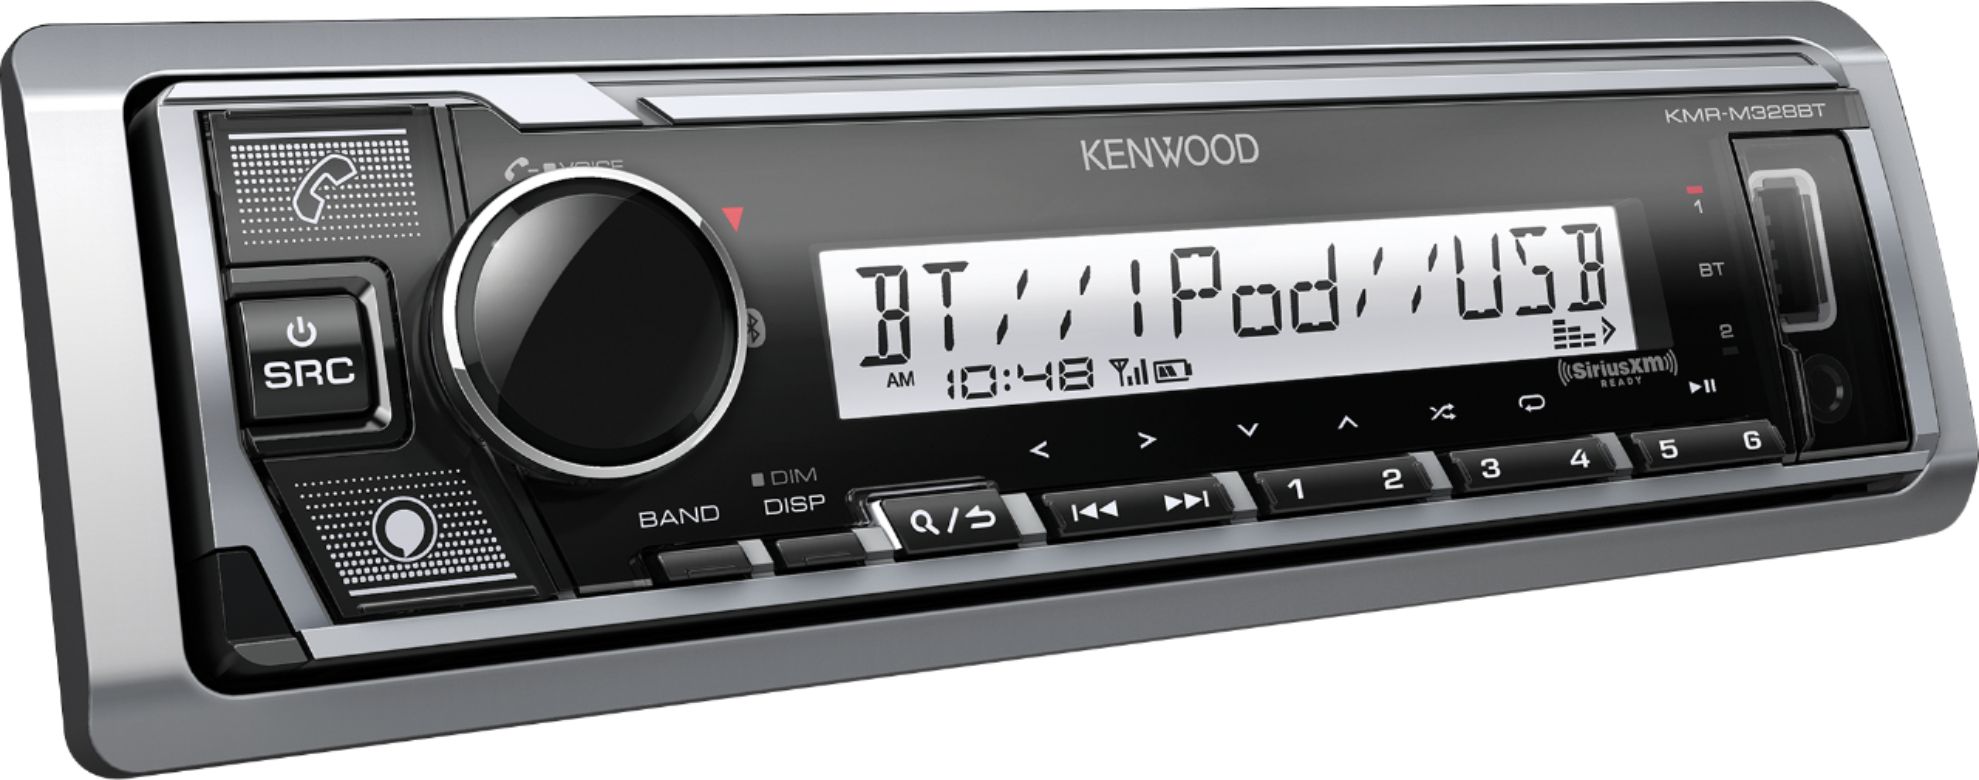 Angle View: Kenwood - In-Dash Digital Media Receiver - Built-in Bluetooth - Satellite Radio-Ready with Detachable Faceplate - Silver